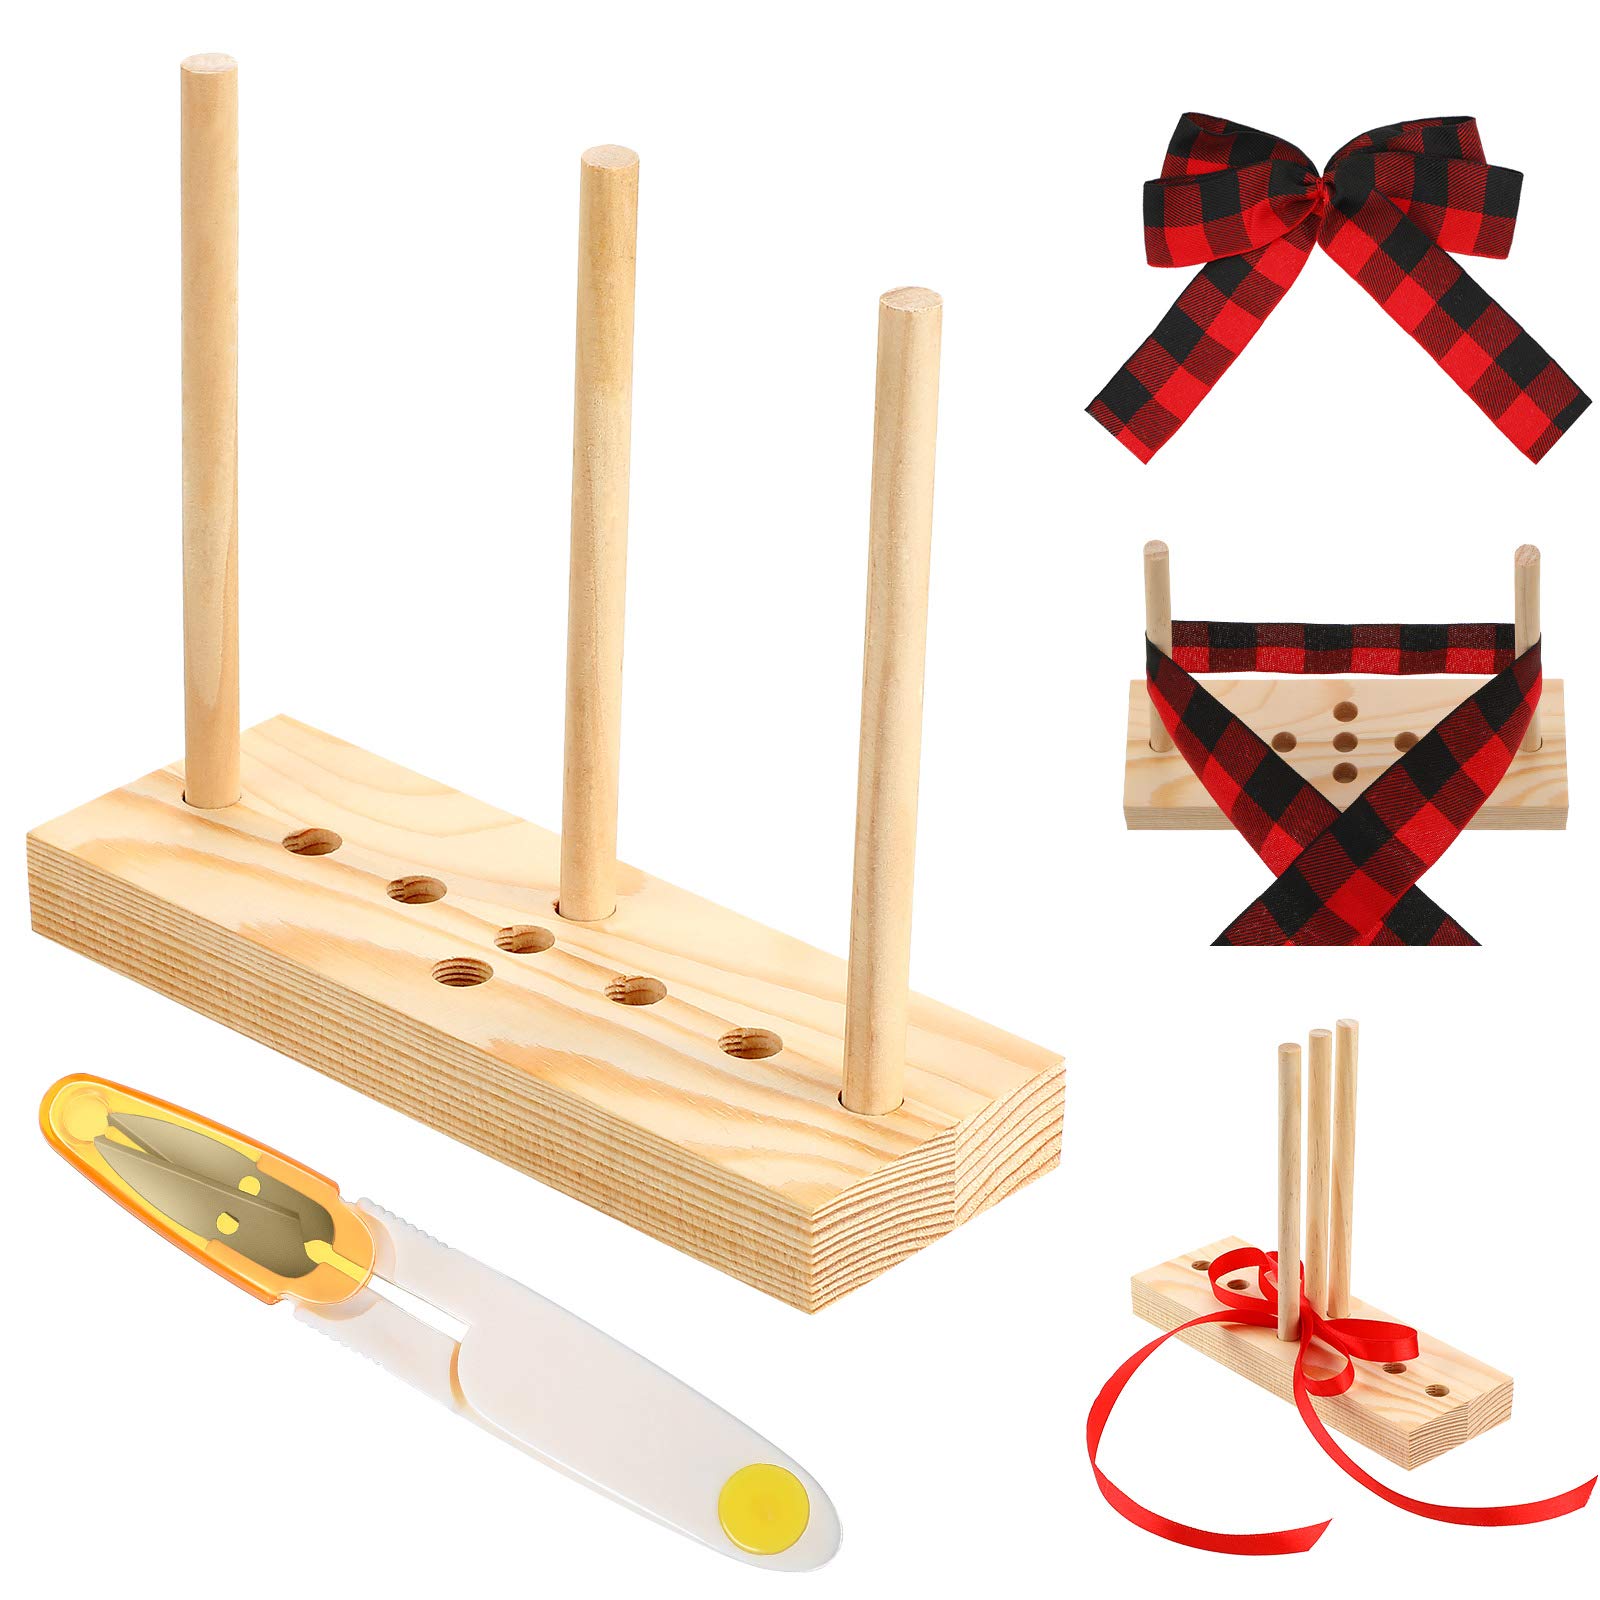 Bow Maker for Ribbon Wreath Wooden Bow Maker Tool with U-Shaped